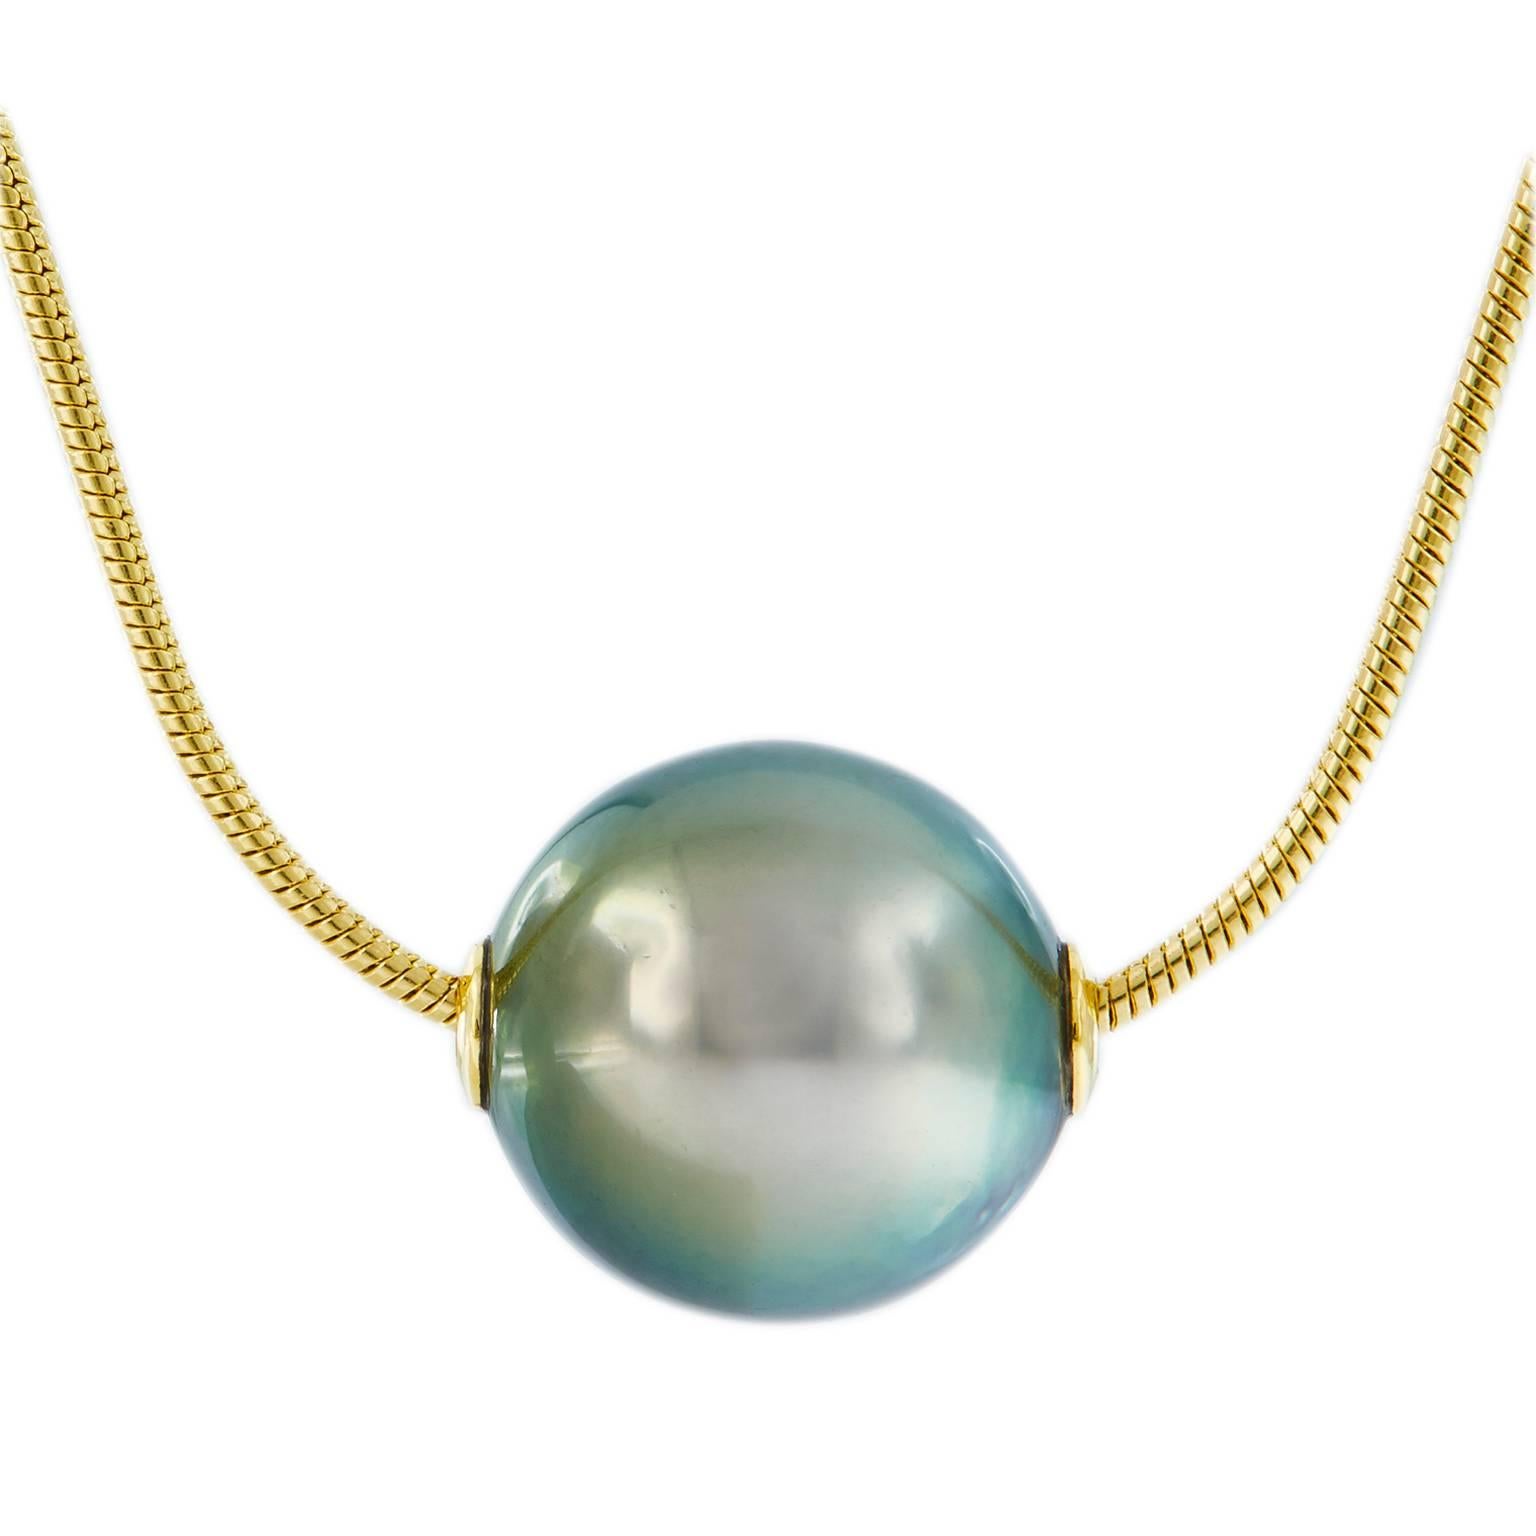 This beautiful Tahitian 10 mm pearl is given center stage in this simple yet elegant necklace. Dark gray pearl shimmers hints of pistachio and aubergine. Pearl is on a 18 in long 18k yellow gold snake chain. Weighs 5.1 grams.